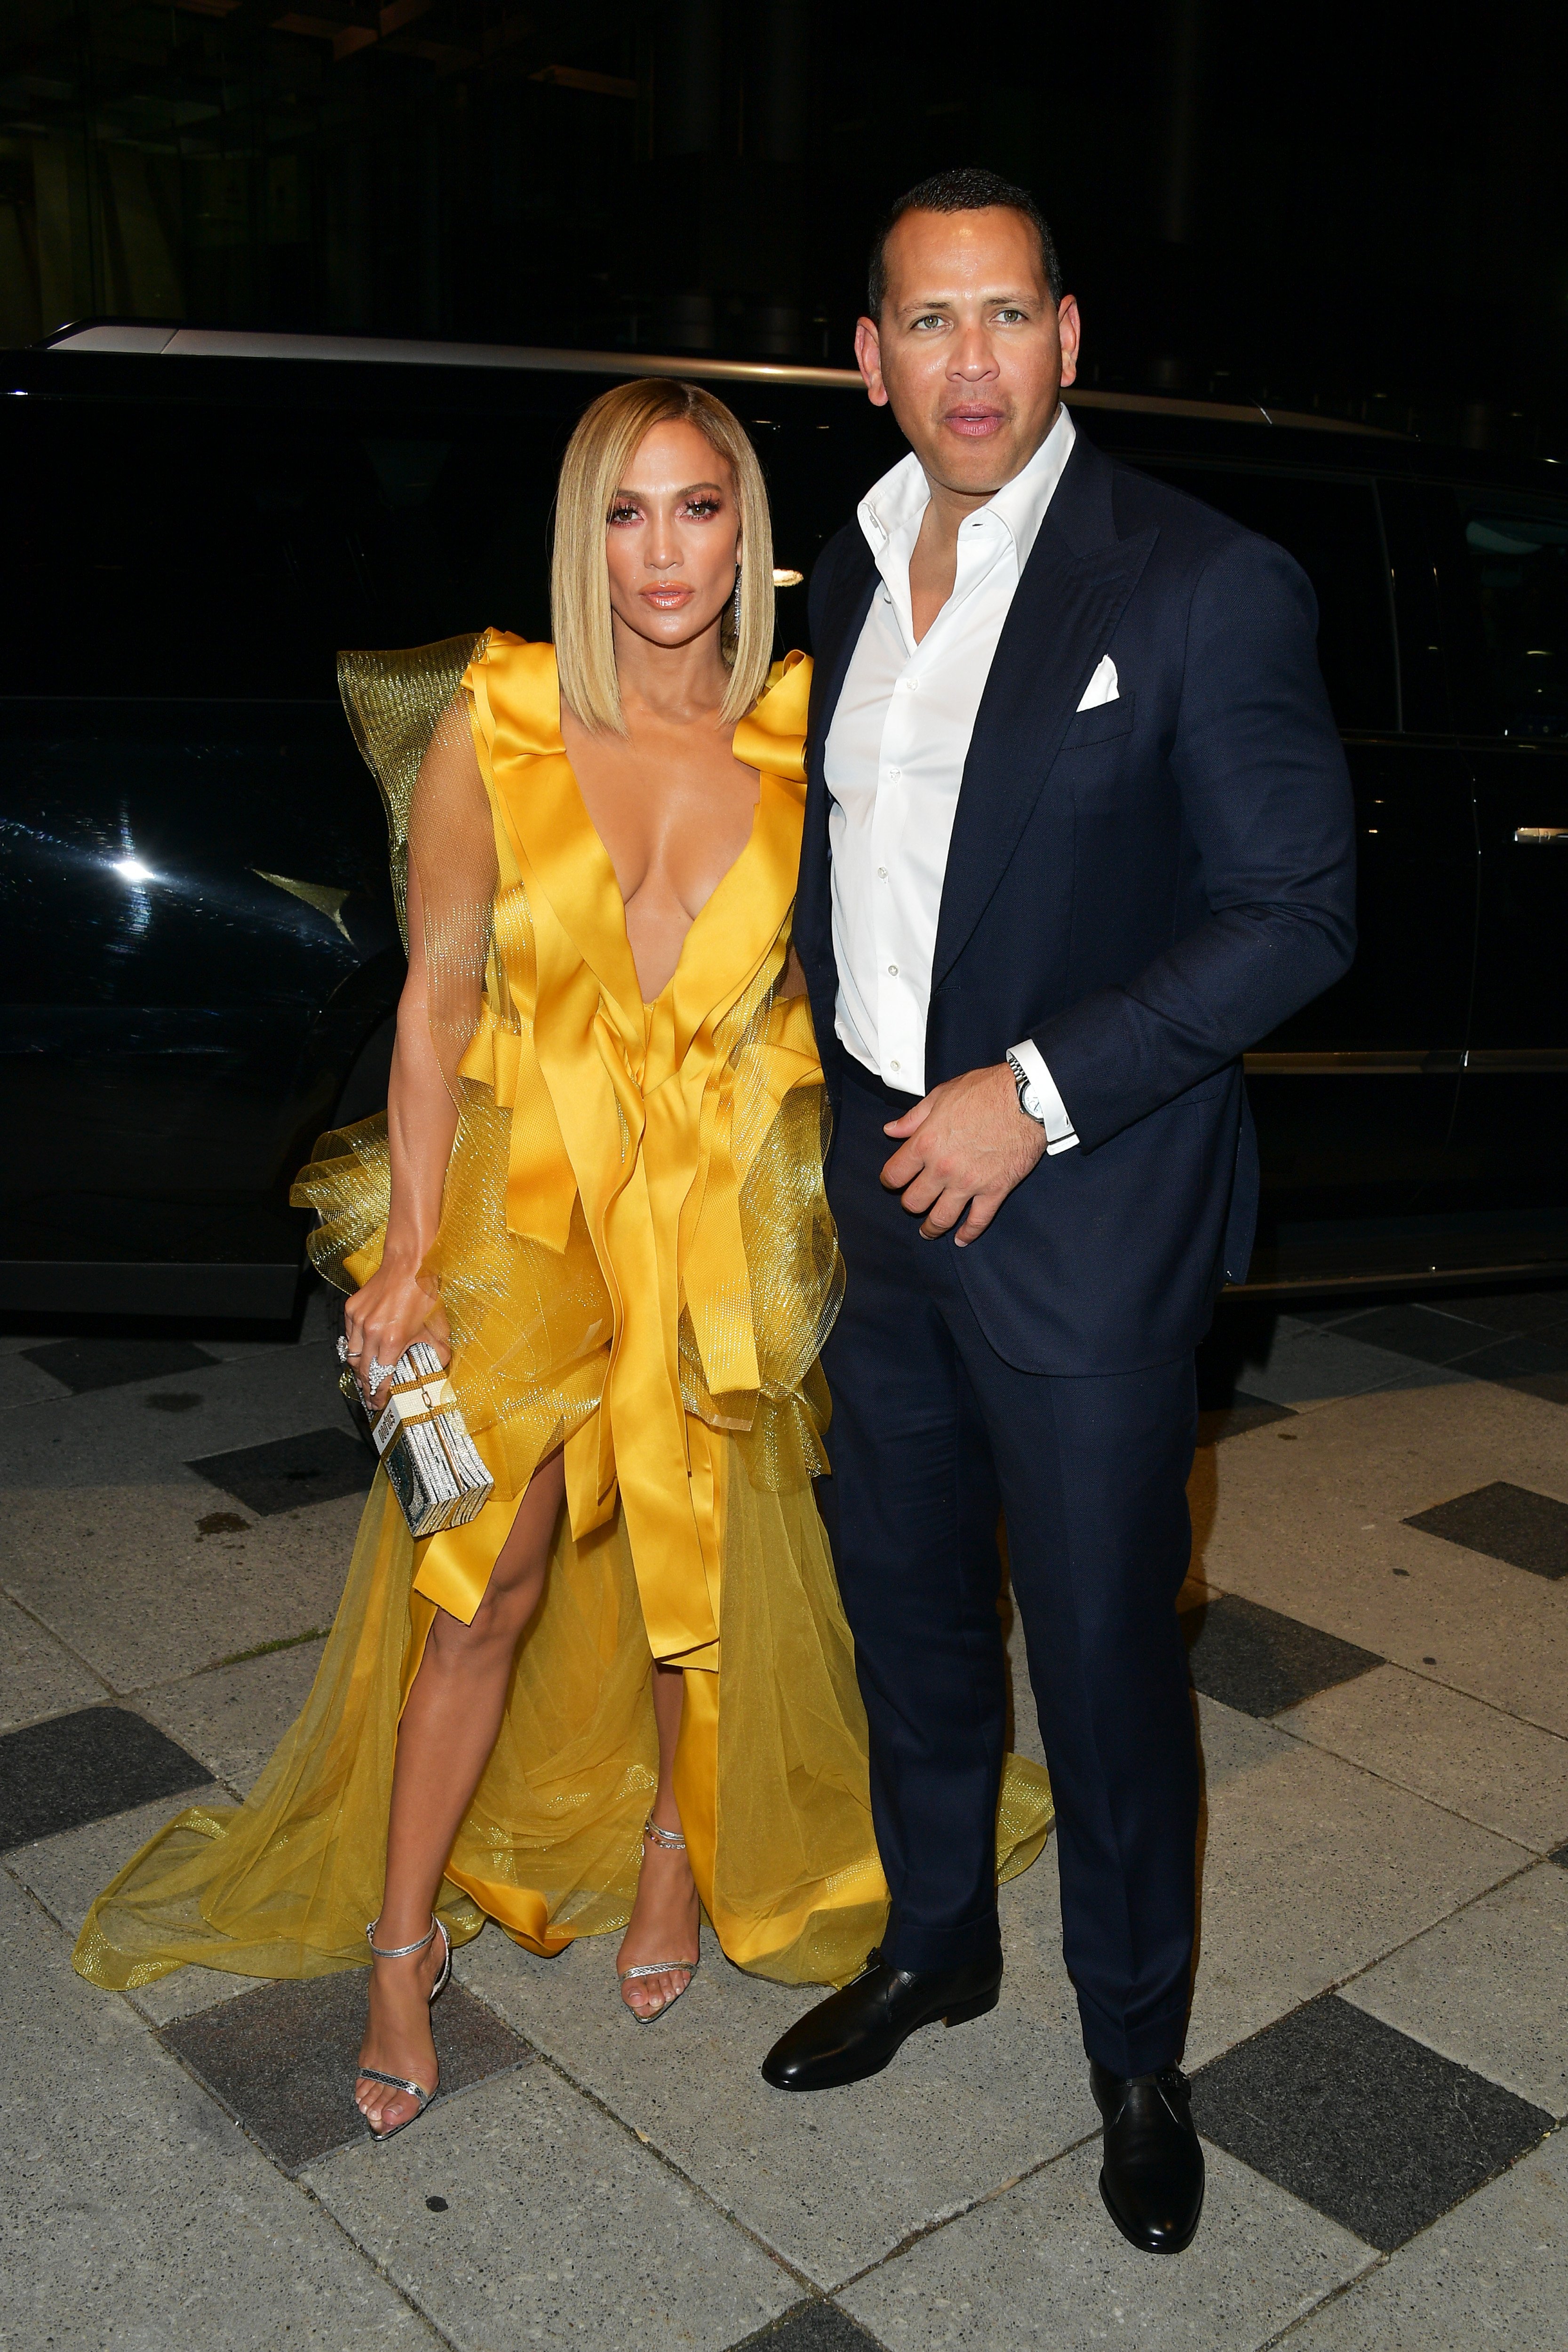 Jennifer Lopez and Alex Rodriguez at the "Hustlers" premiere in Toronto, September, 2019. | Photo: Getty Images.